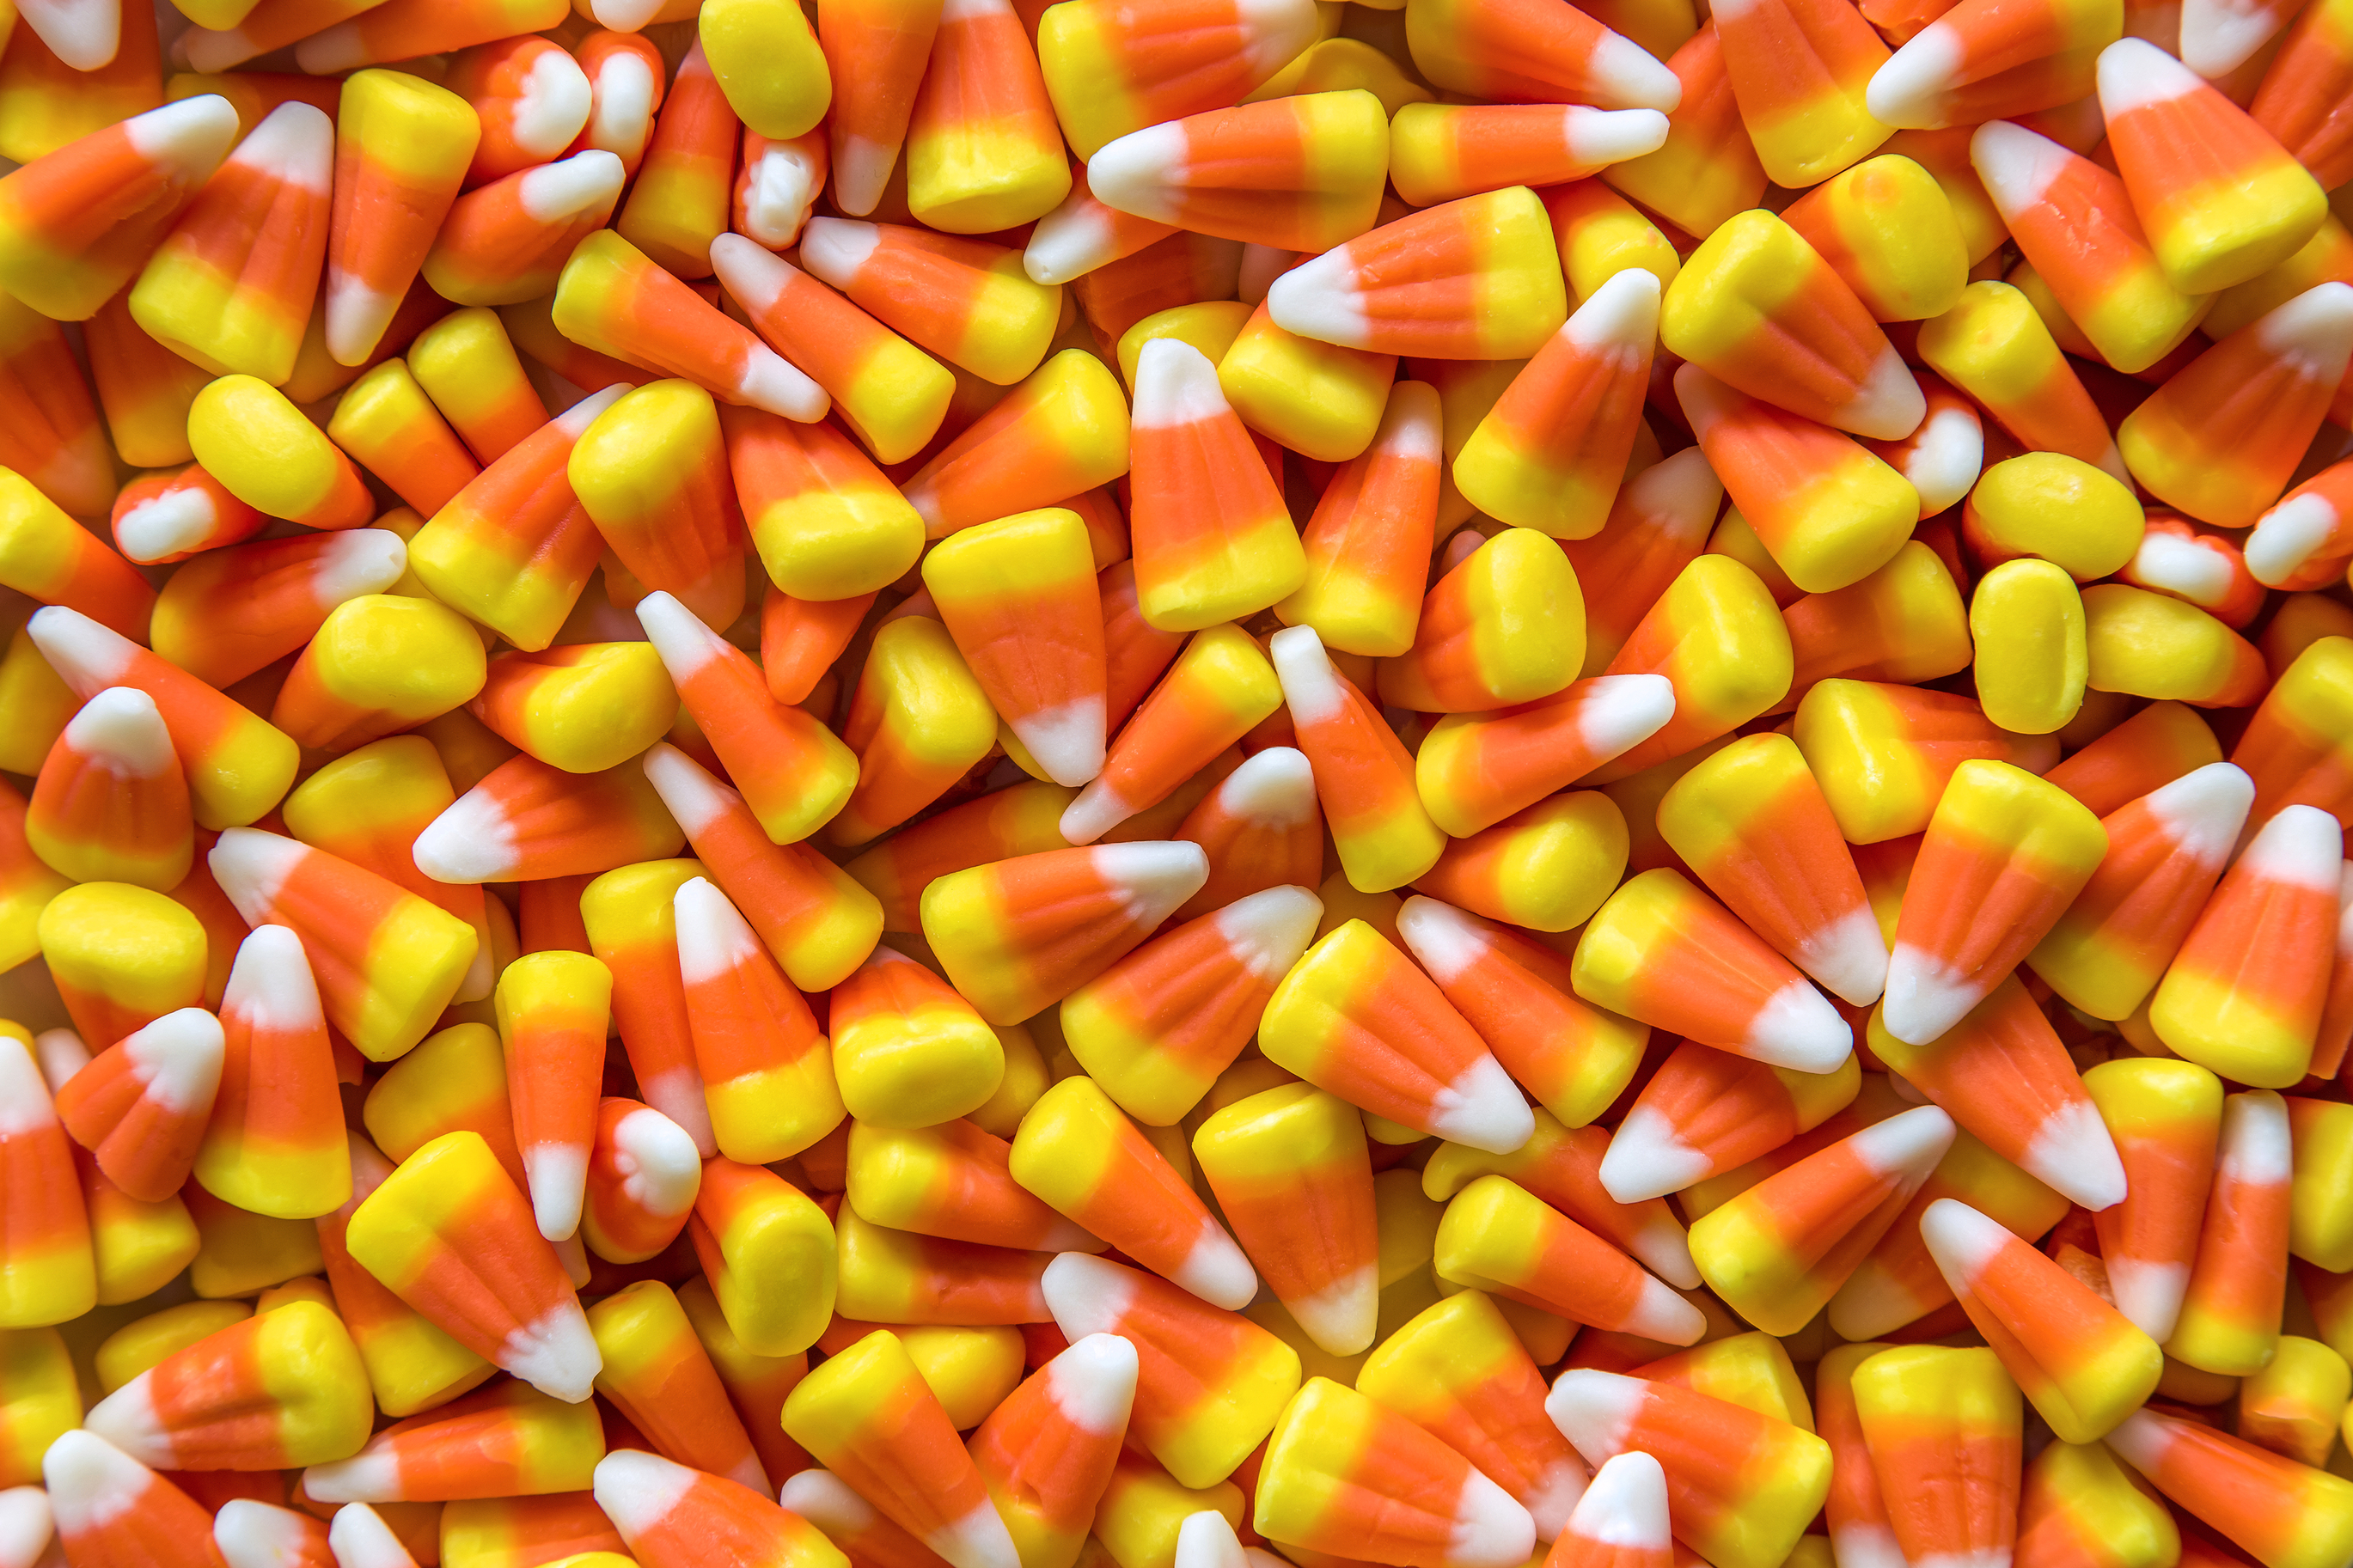 Today only: 7 pounds of candy corn for $17 shipped